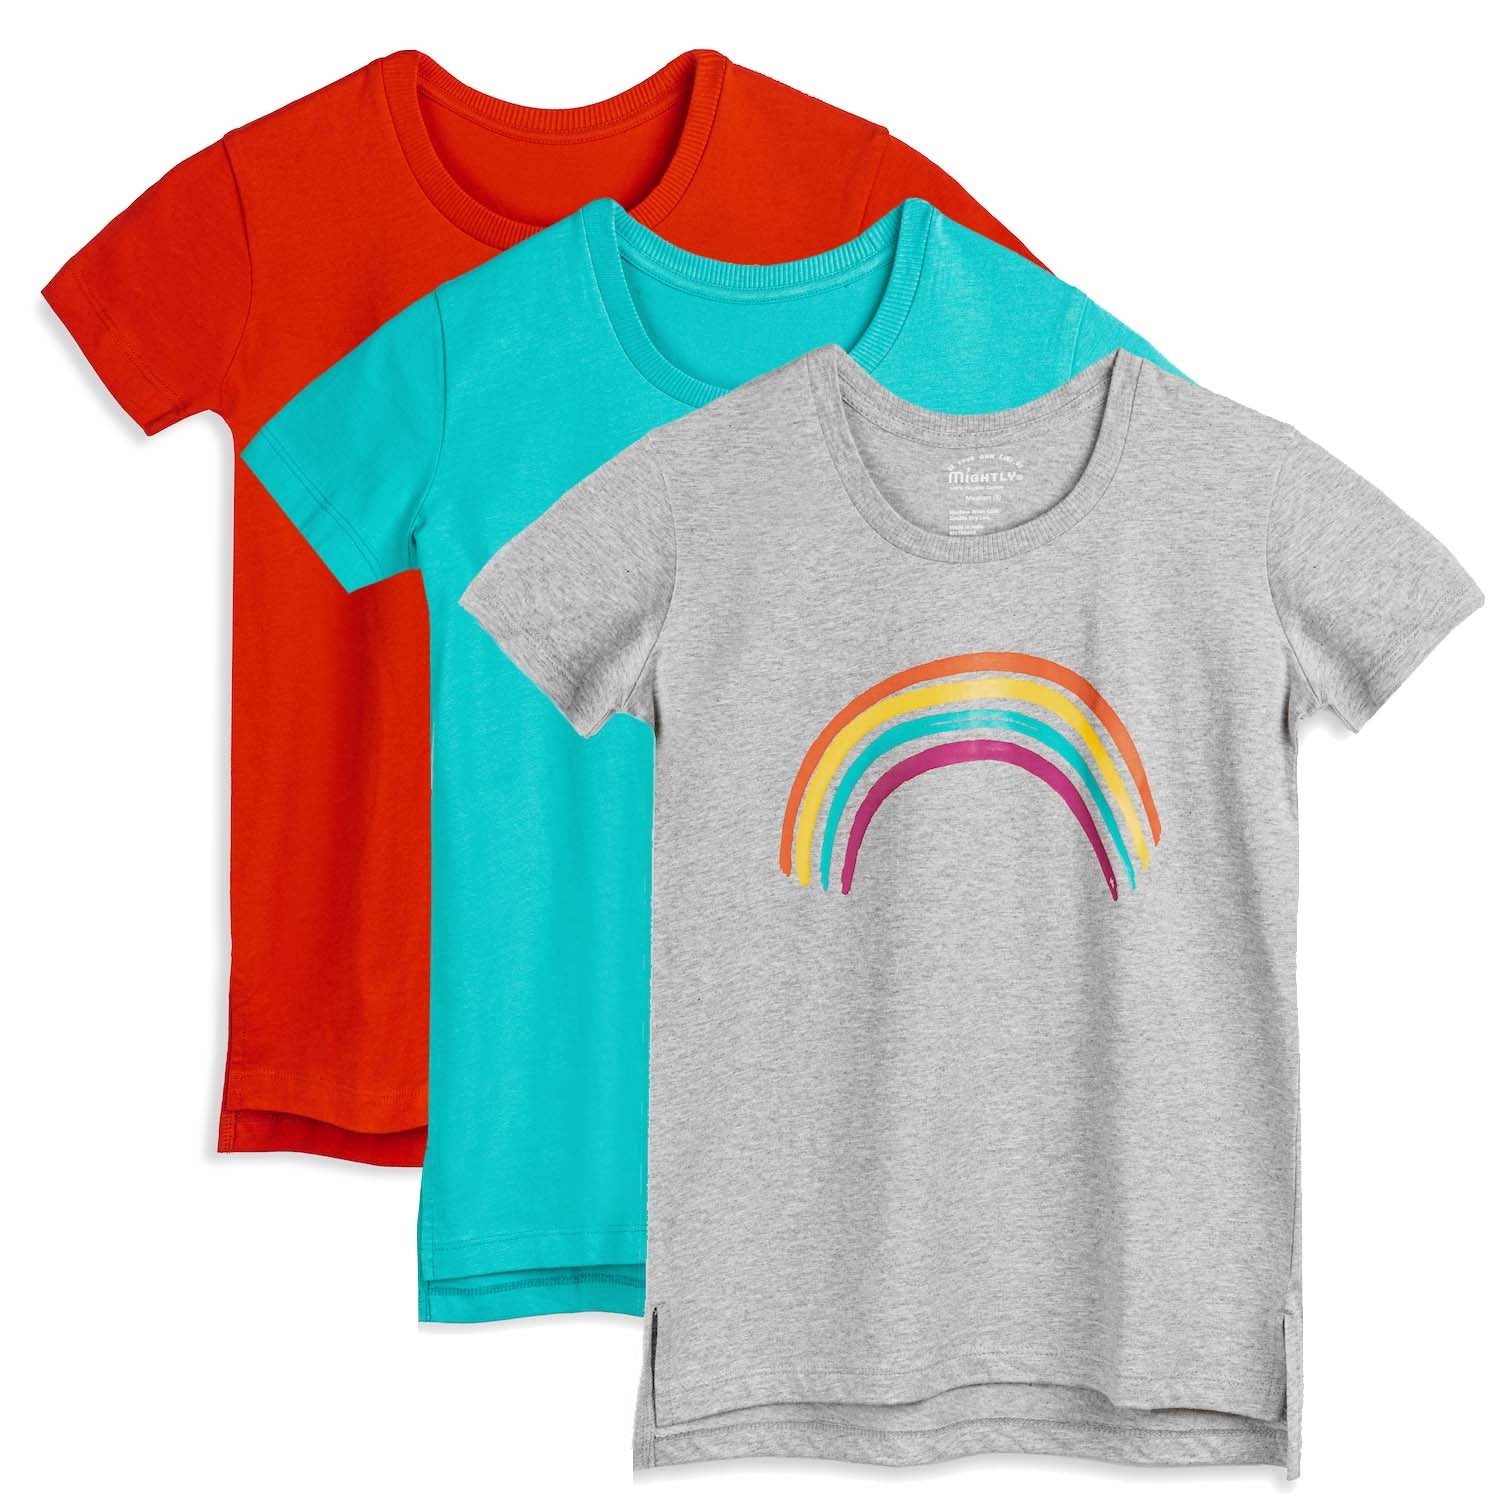 Organic Cotton Kids Shirts - - T-Shirts Length Mightly Extended 3 Pack